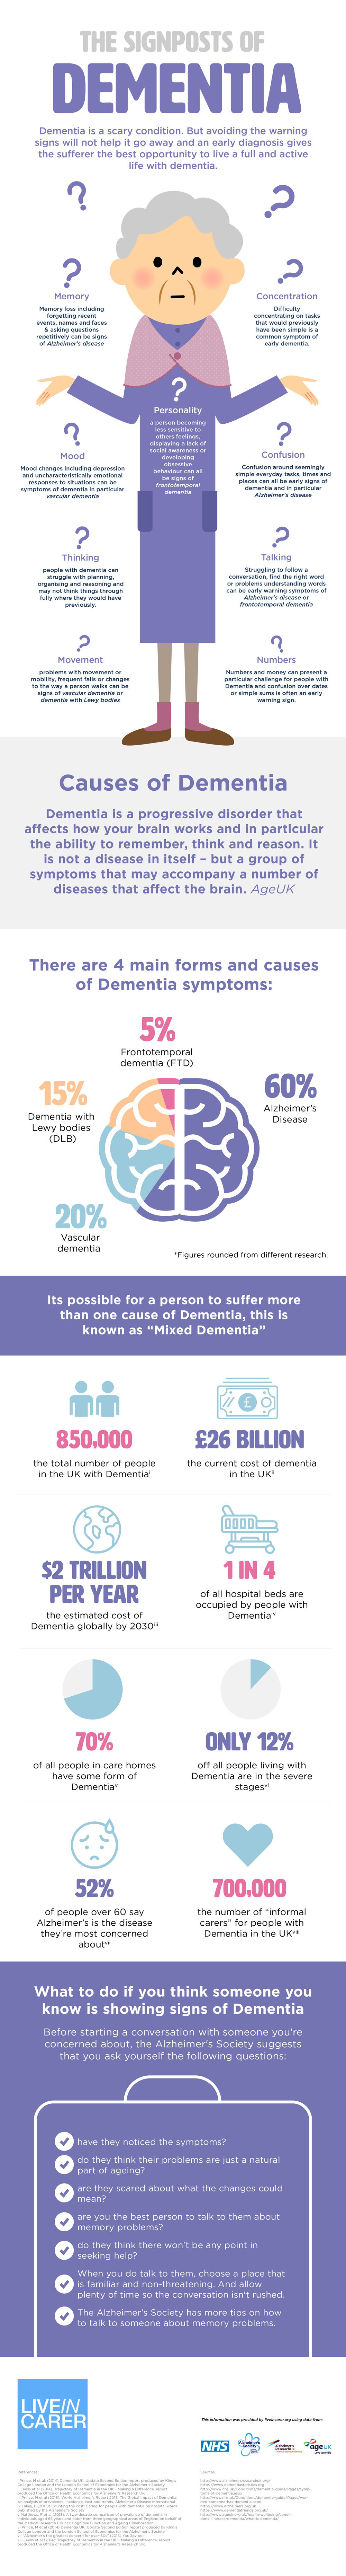 The Signs & Symptoms of Dementia